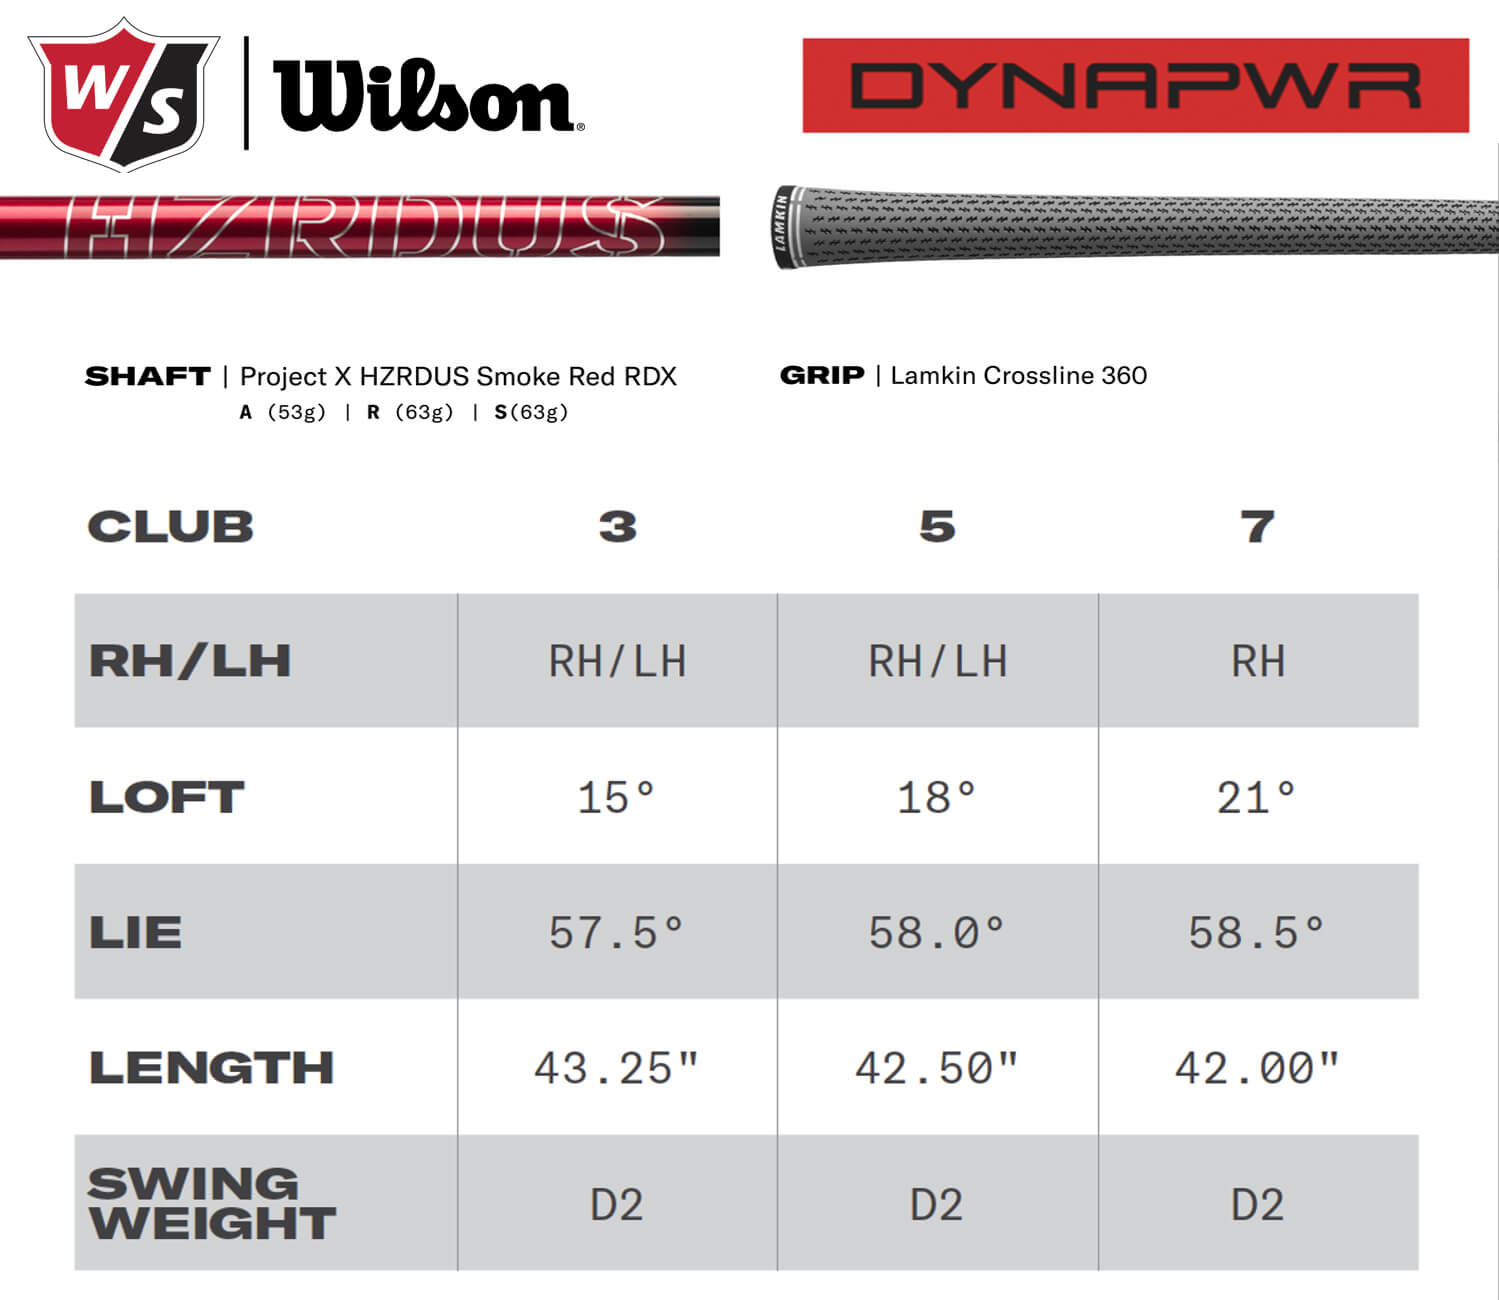 Specification for Wilson Dynapower Golf Fairway Woods